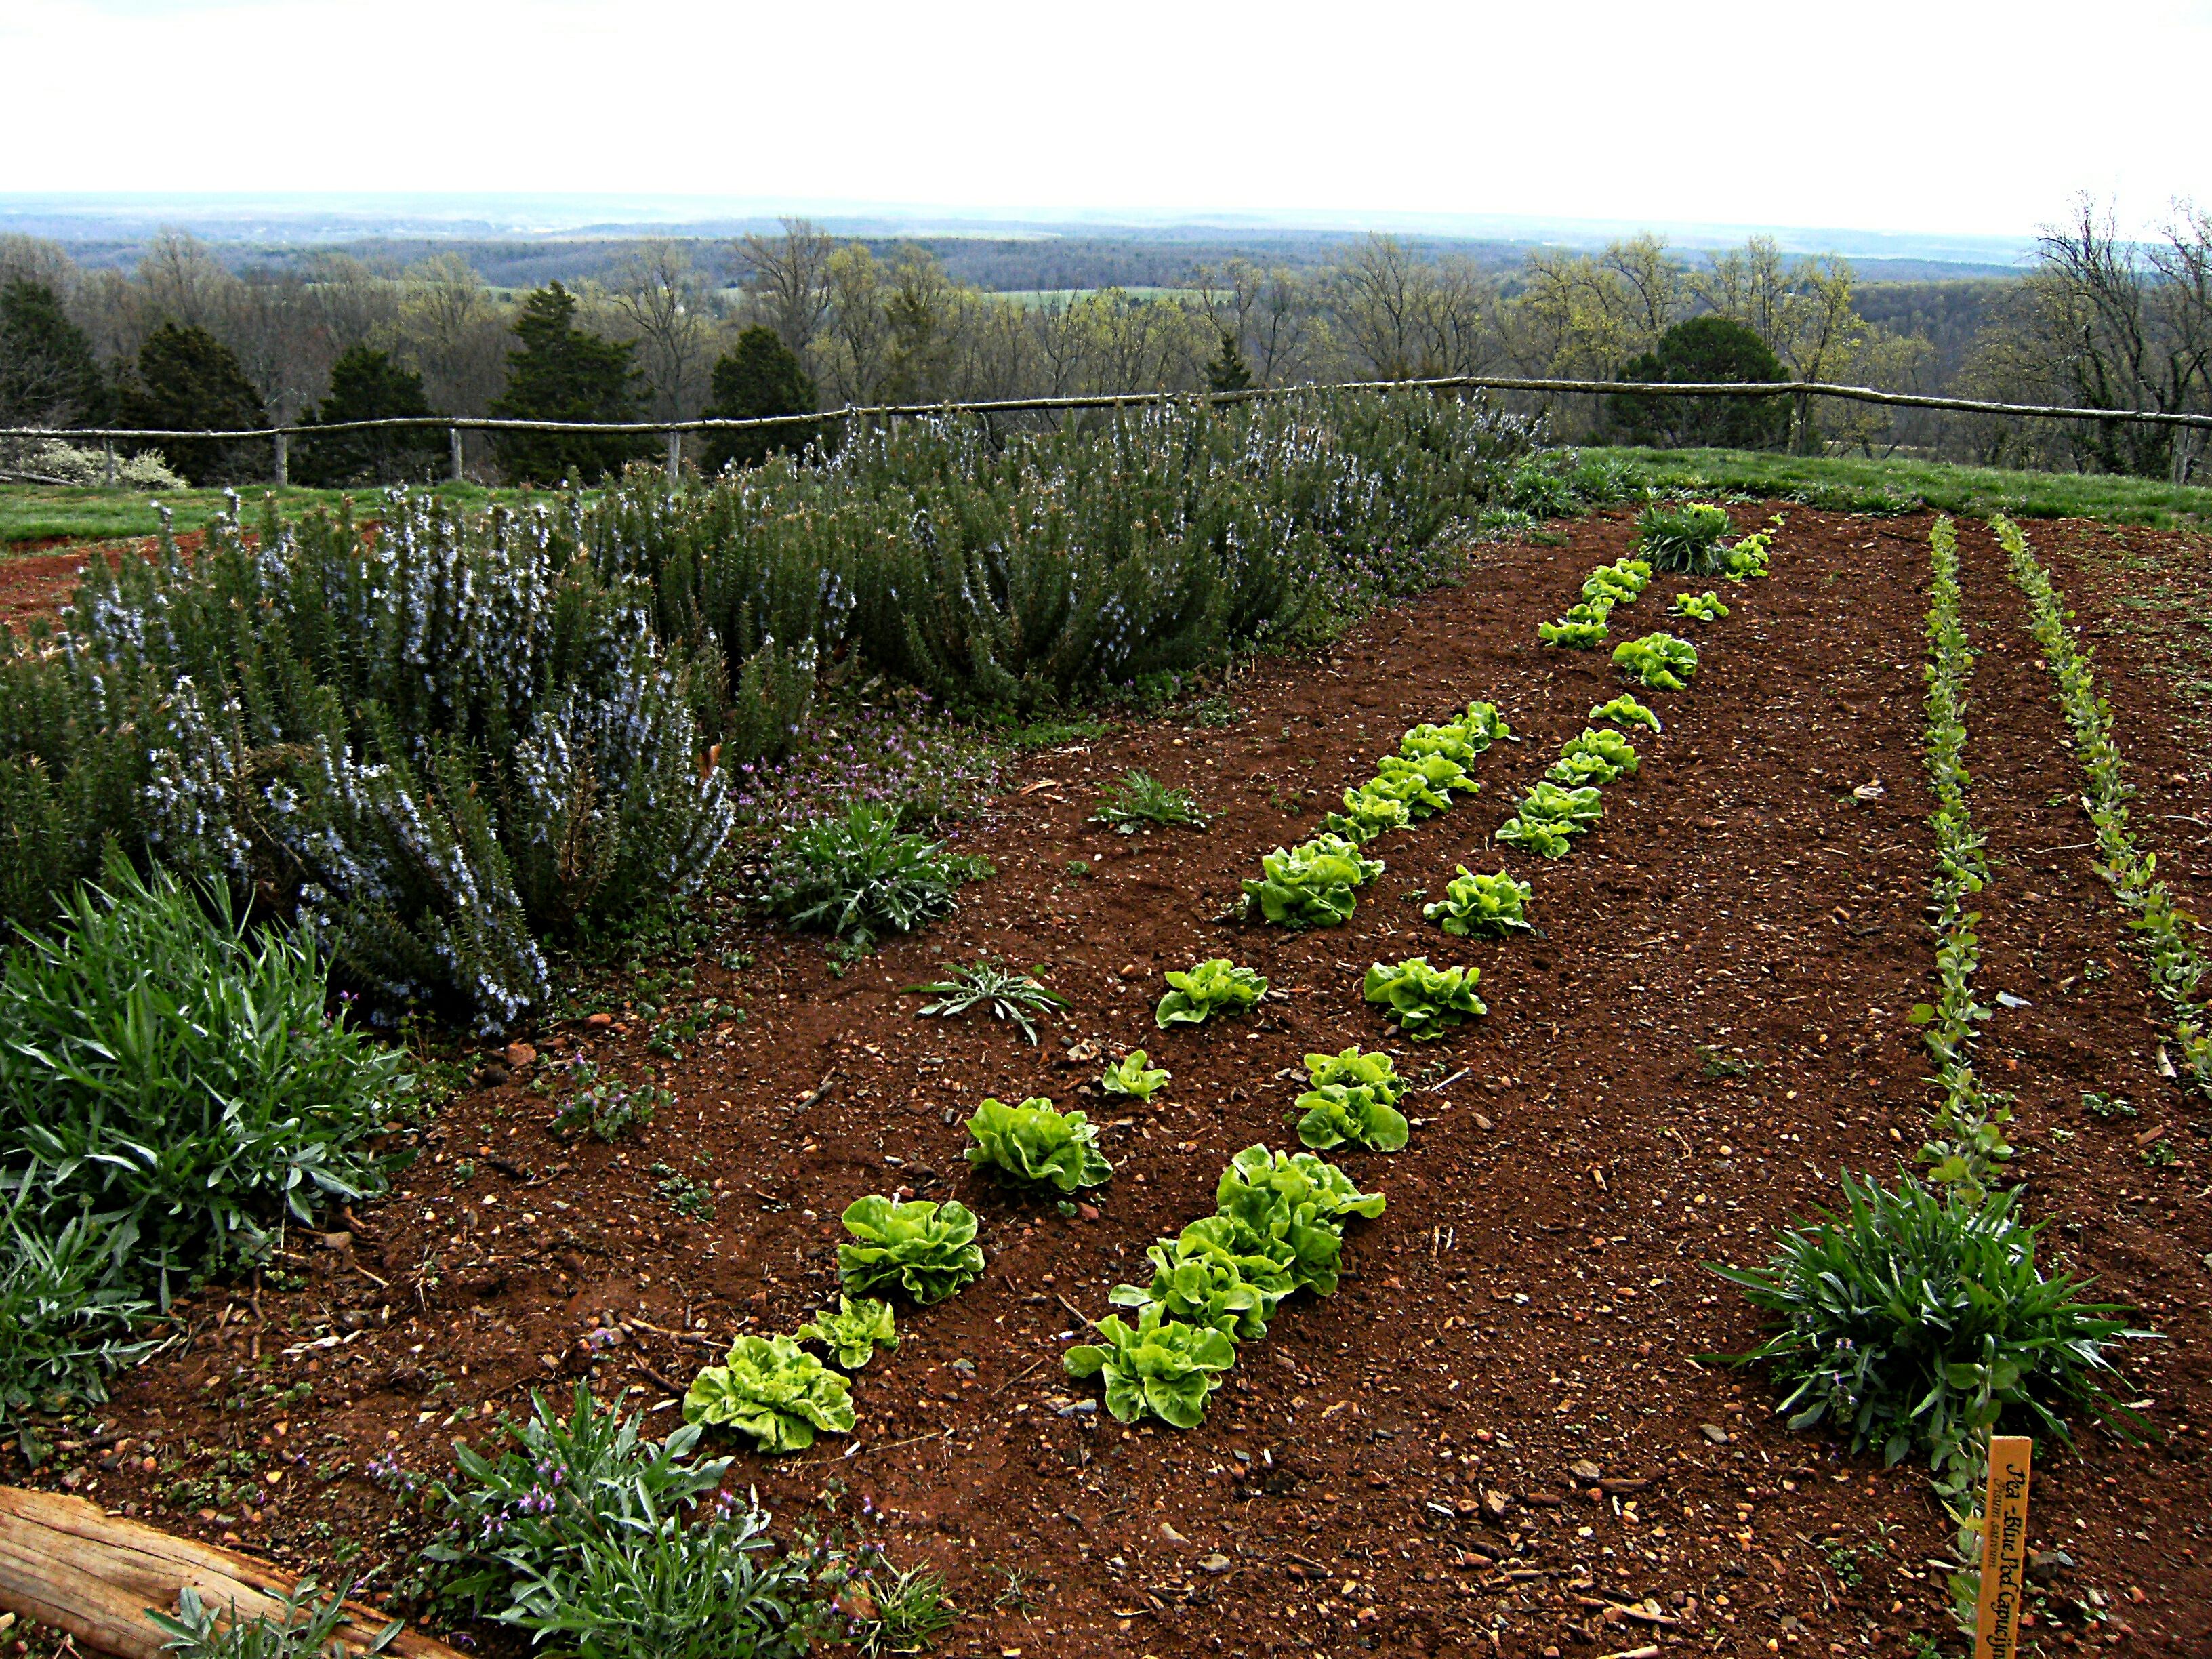 Lettuce and peas in rows in the Monticello vegetable garden.